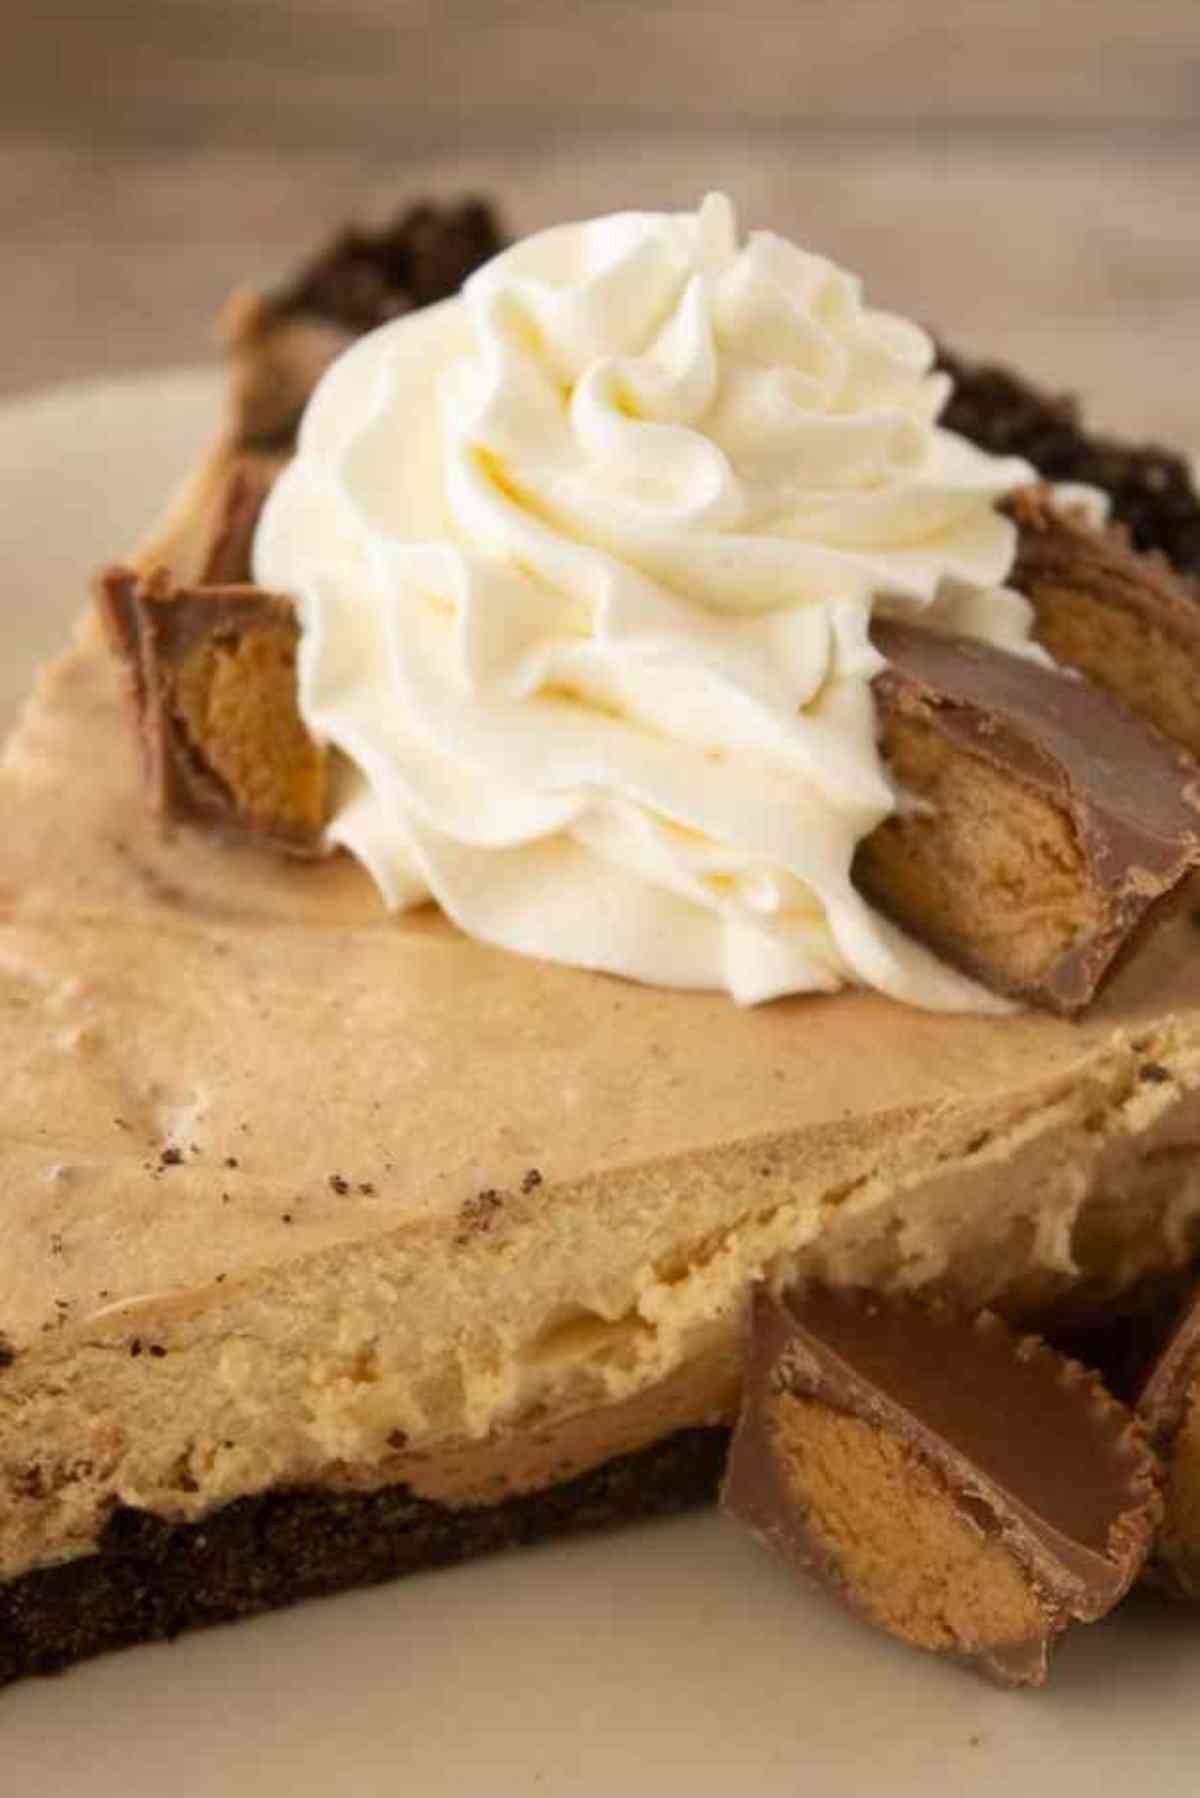 Slice of Chocolate Peanut Butter Mousse pie garnished with whipped cream and reese's!